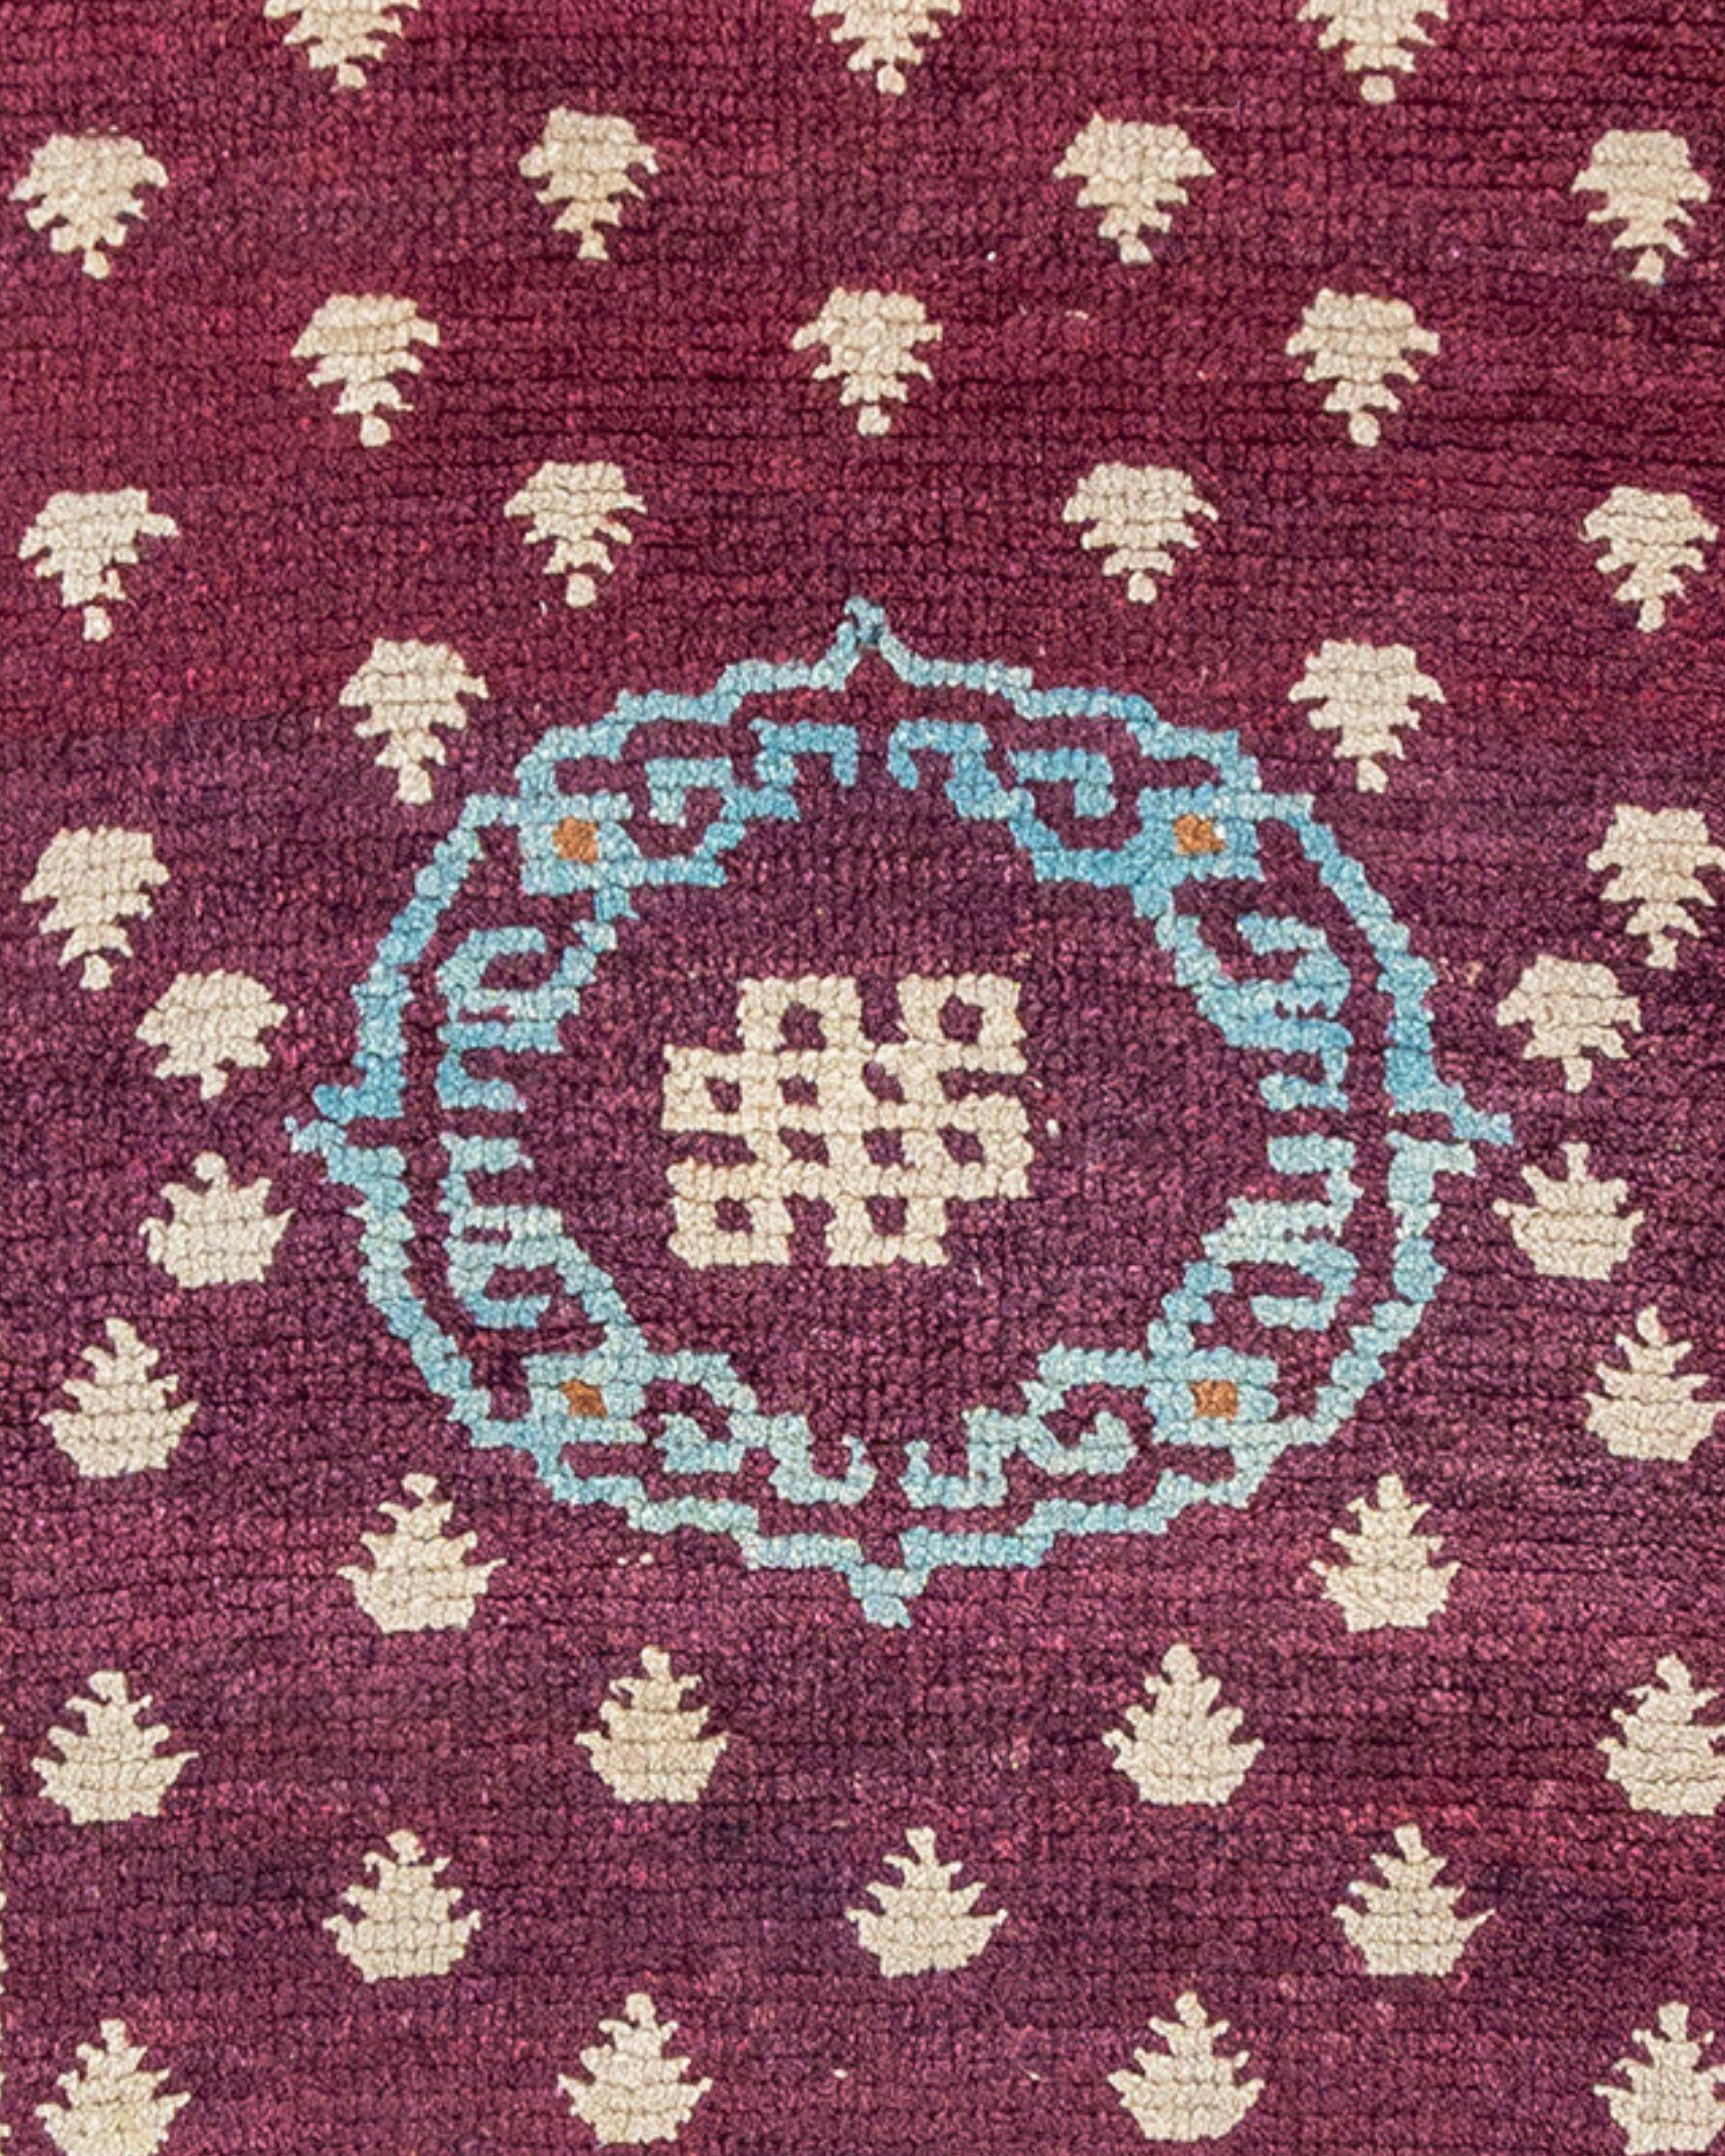 Hand-Woven Antique Tibetan Rug, Mid-19th Century For Sale